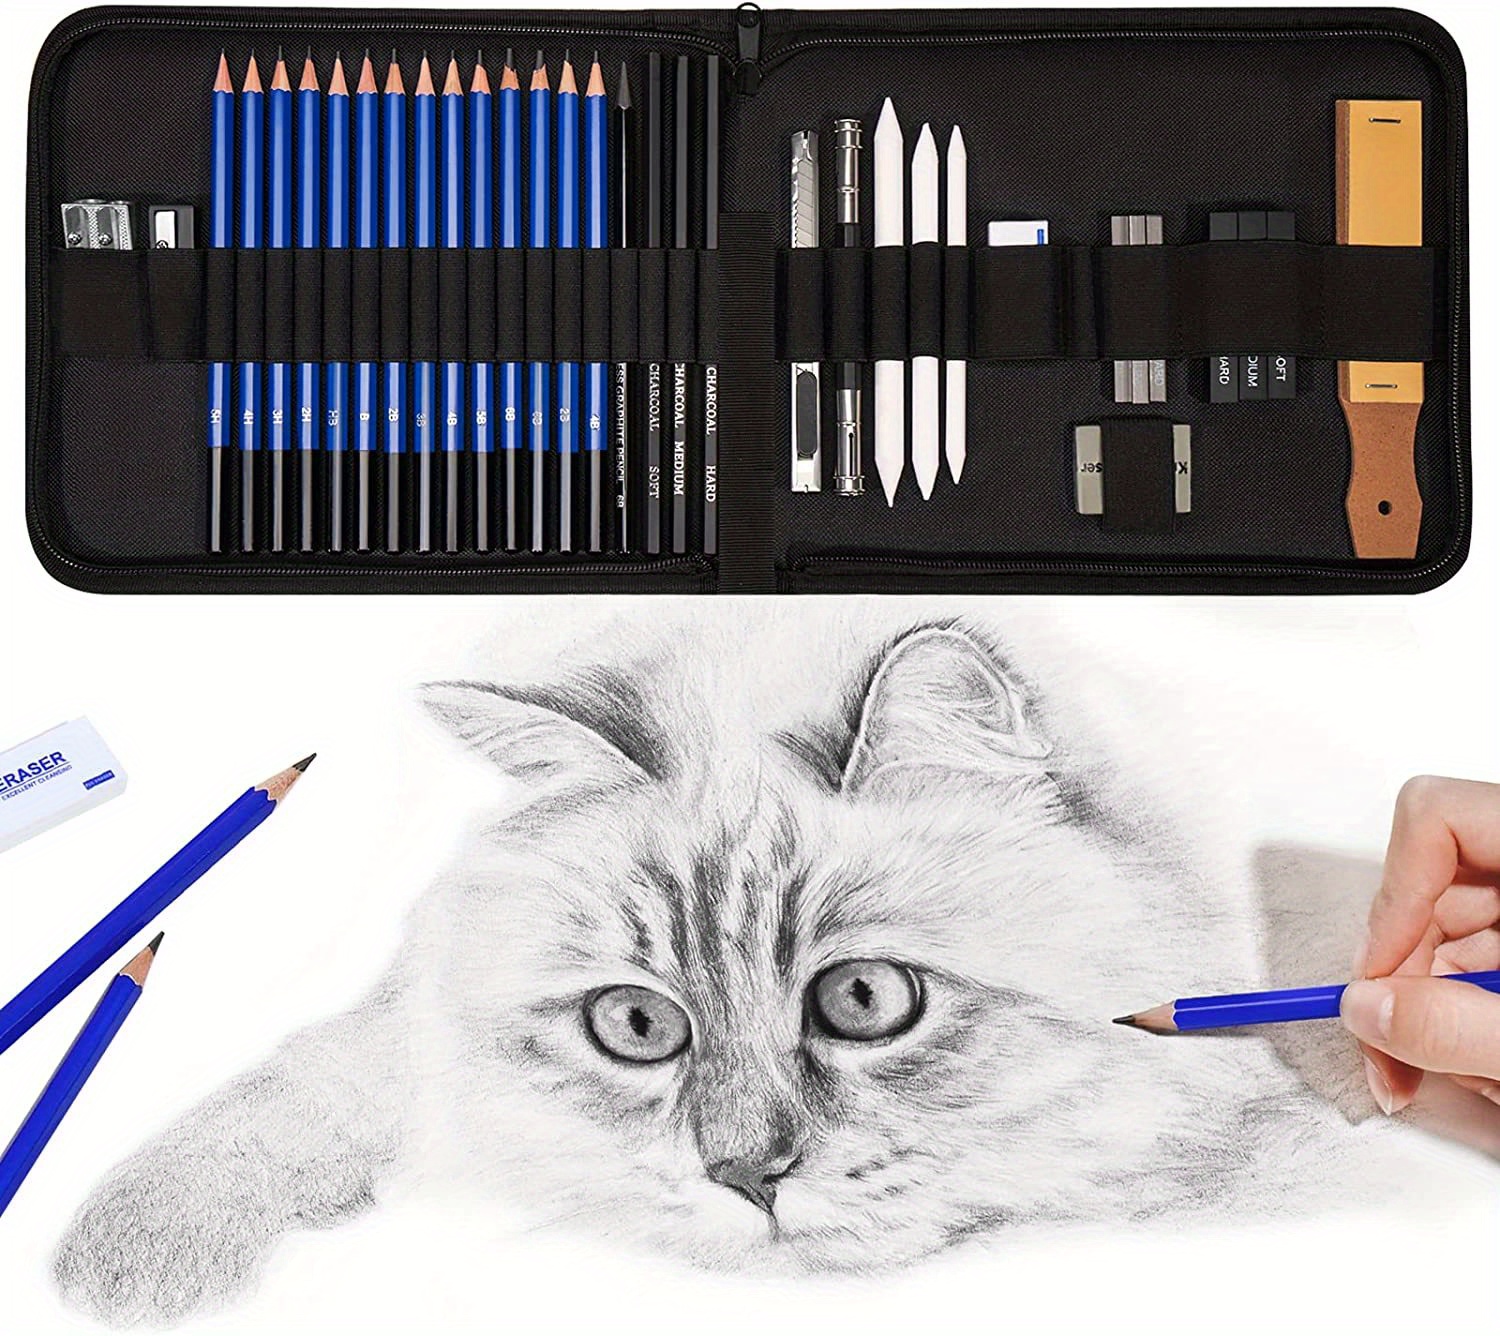 34 Pieces Pro Drawing Kit Sketching Pencils Set,Pro Art Sketch Supplies  With 1 Sketchbook, Portable Zippered Travel Case-Charcoal Pencils, Sketch  Penc